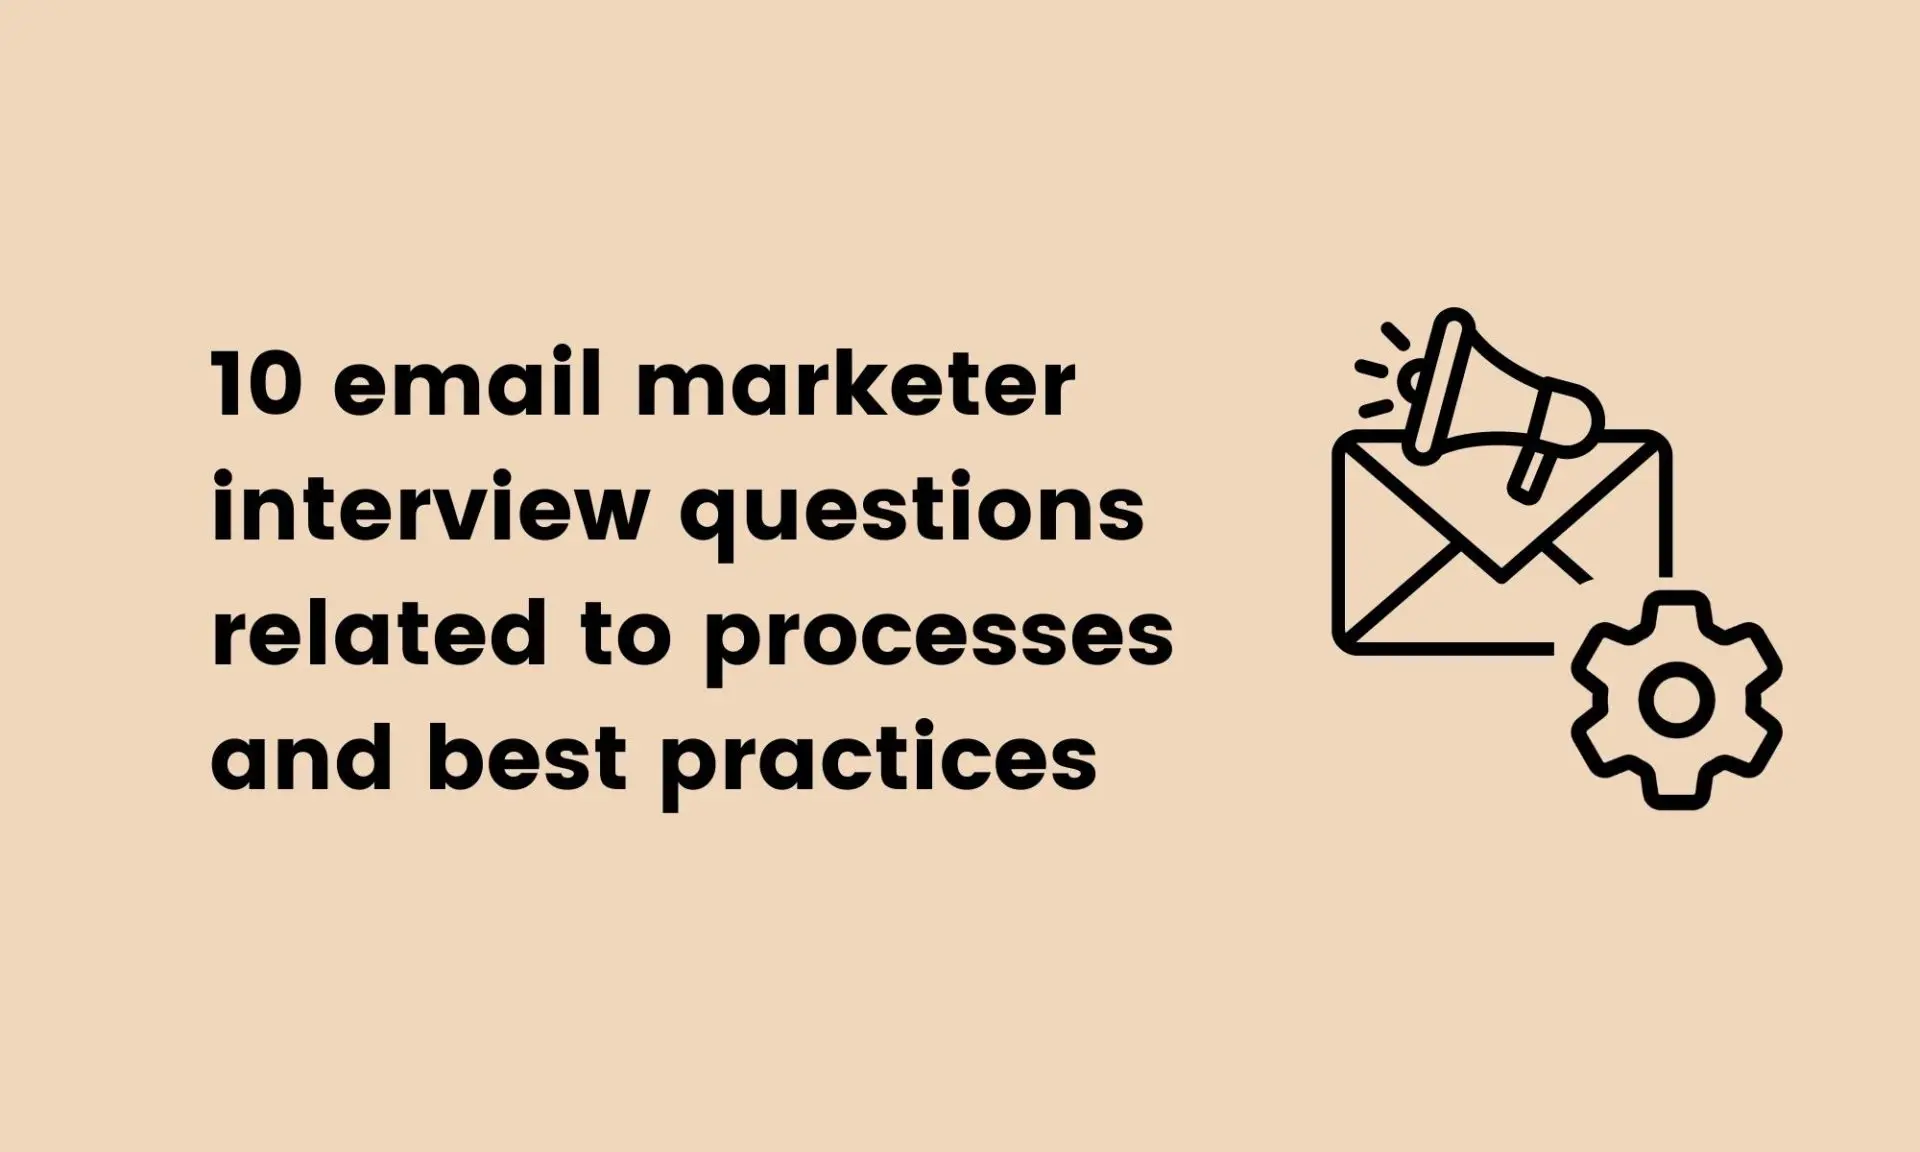 10 email marketer interview questions related to processes and best practices